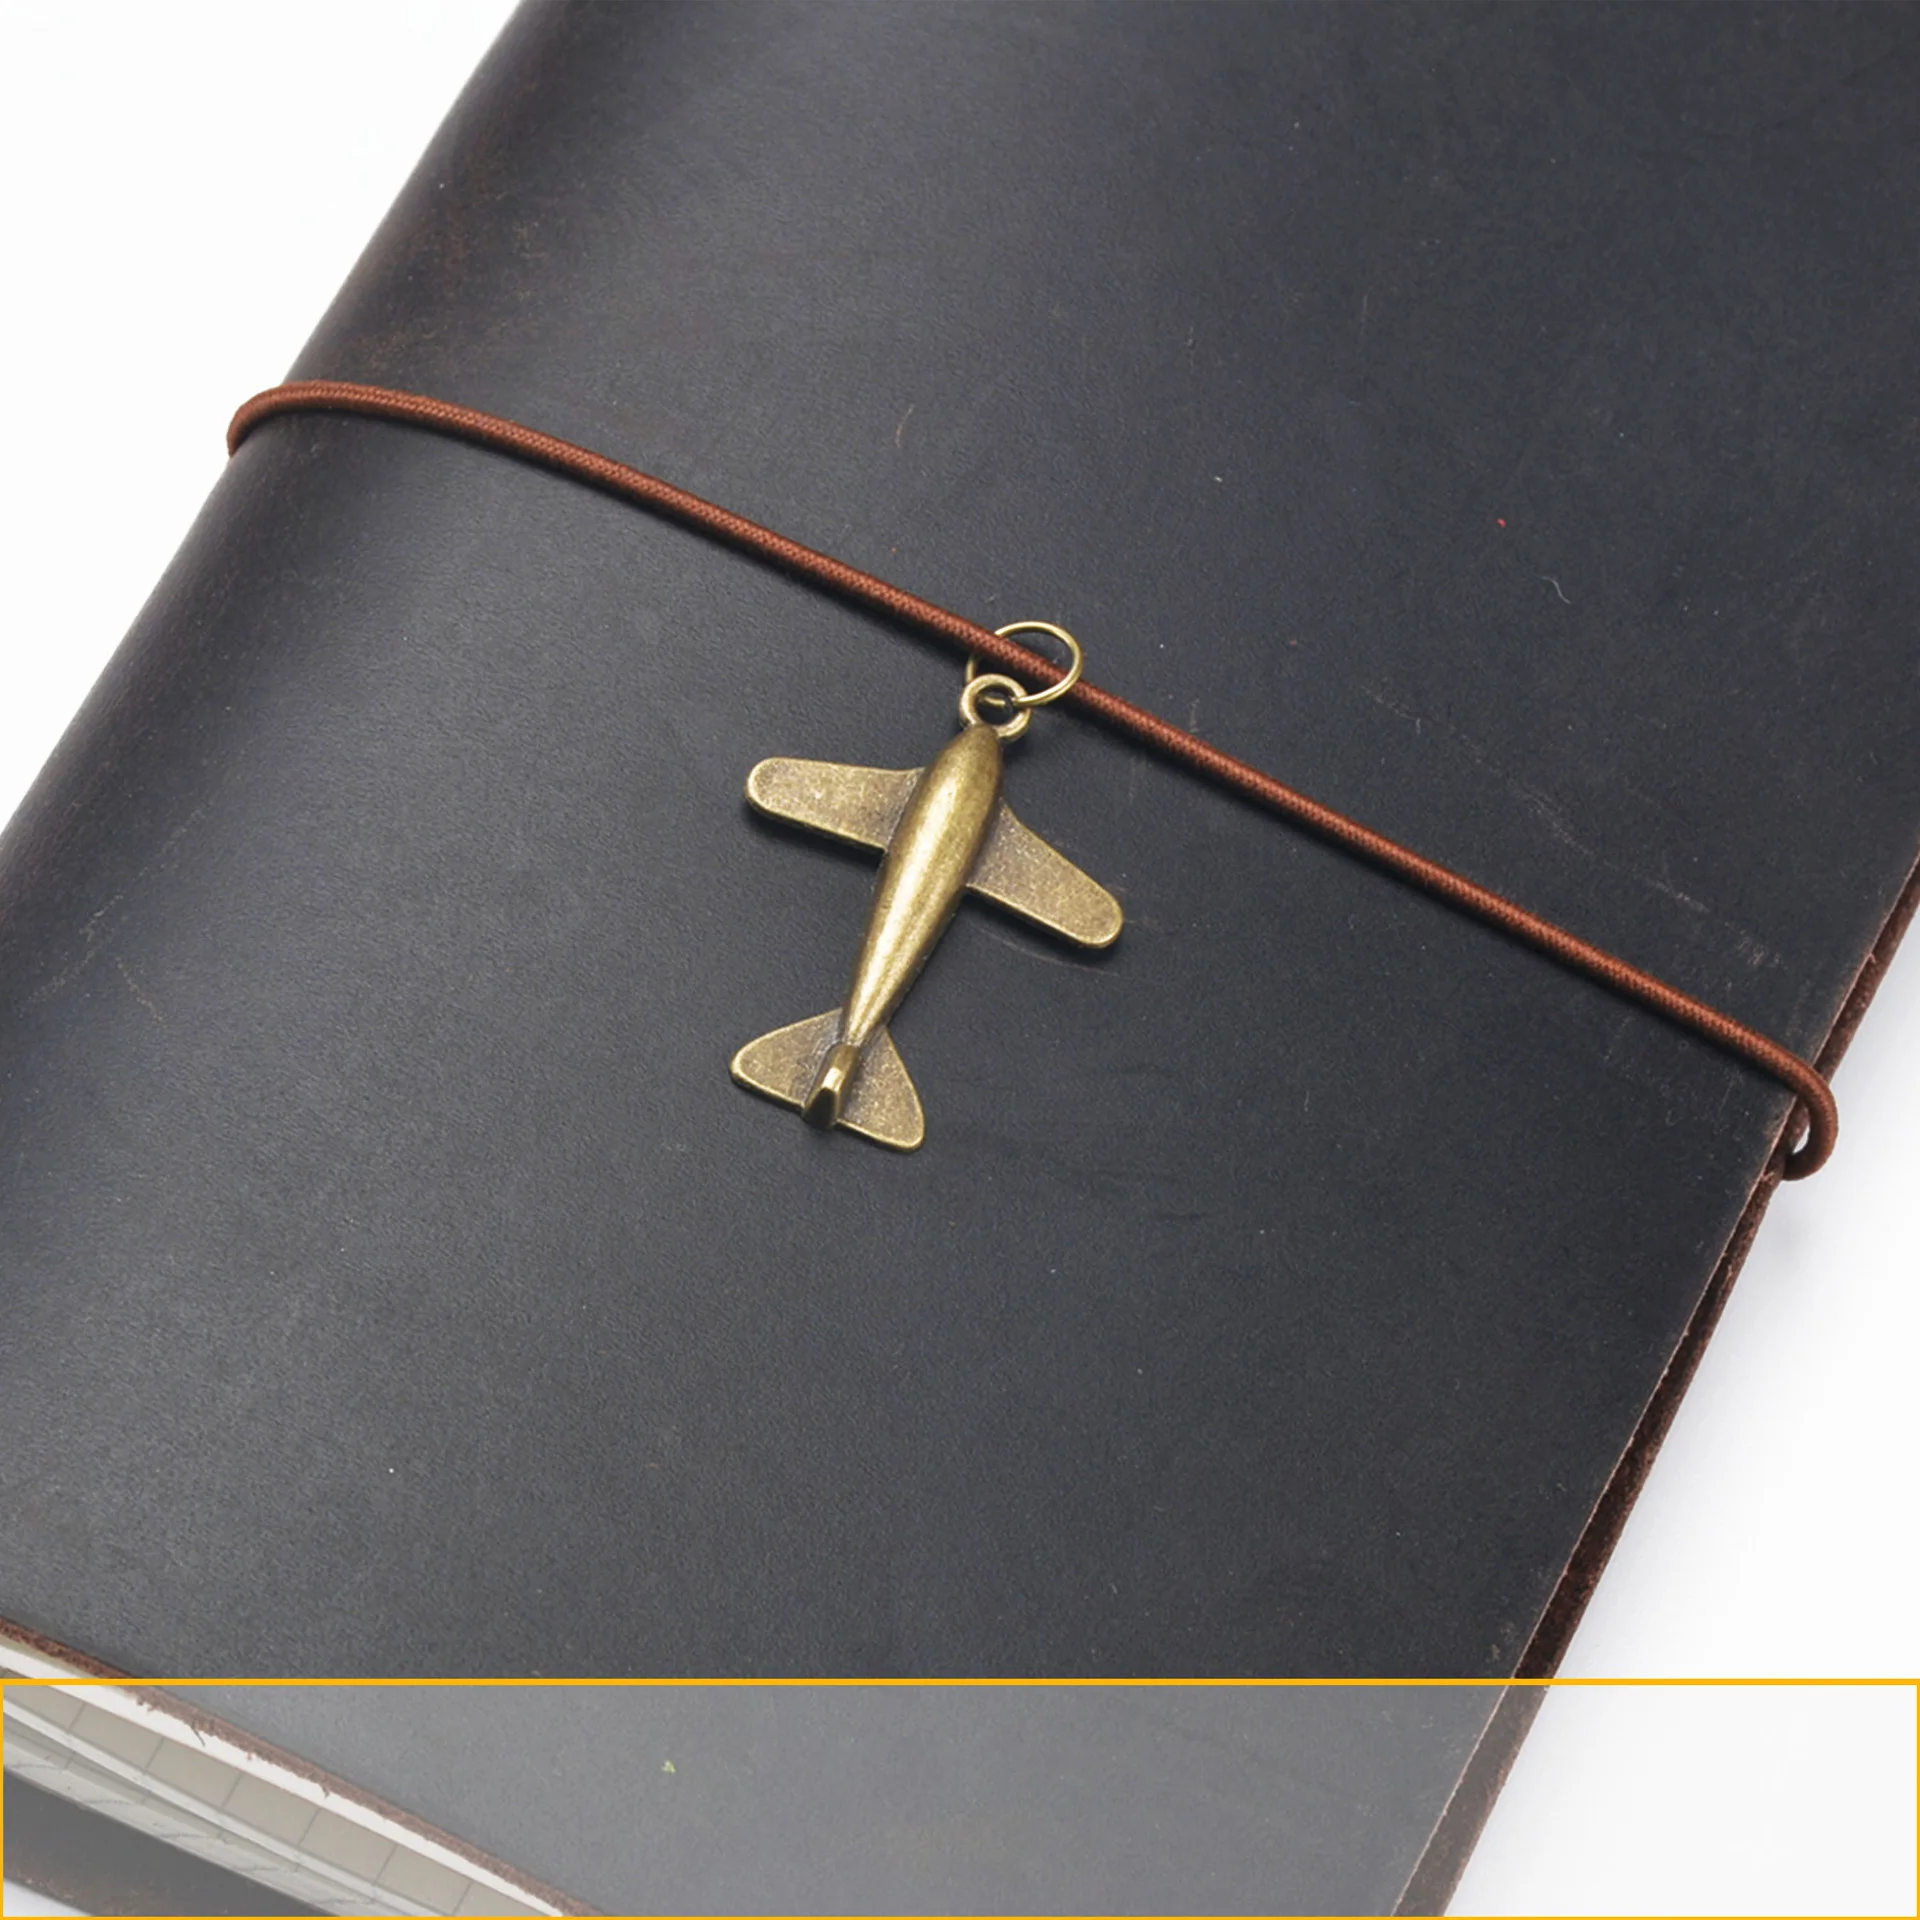 DIY Metal Bookmark Journal Cover Pendant Accessories Leather Travel Notebook Jewelry Art Ornaments Charm Retro Style Small Thing images - 6